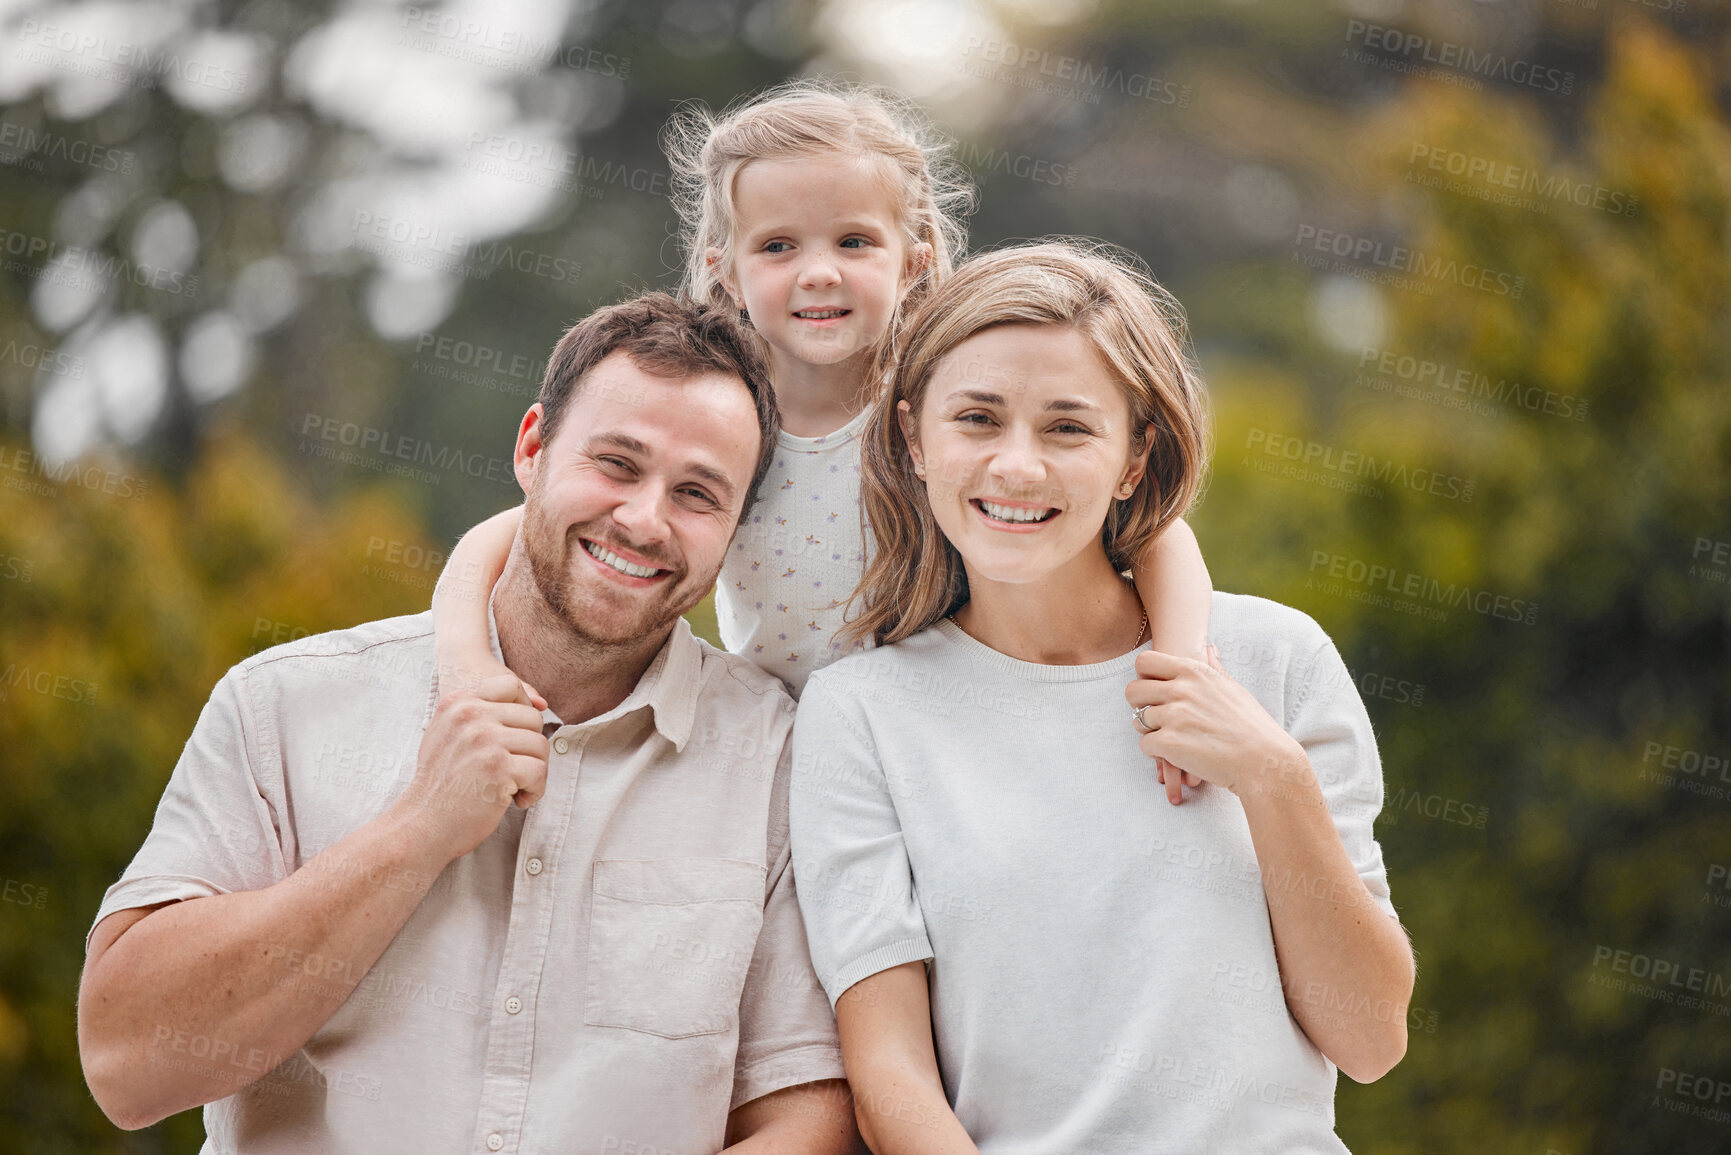 Buy stock photo Portrait of family in park, parents and child with smile, hug and mom, dad and girl in backyard. Nature, happiness and man, woman and kid in garden with love, support and outdoor bonding together.